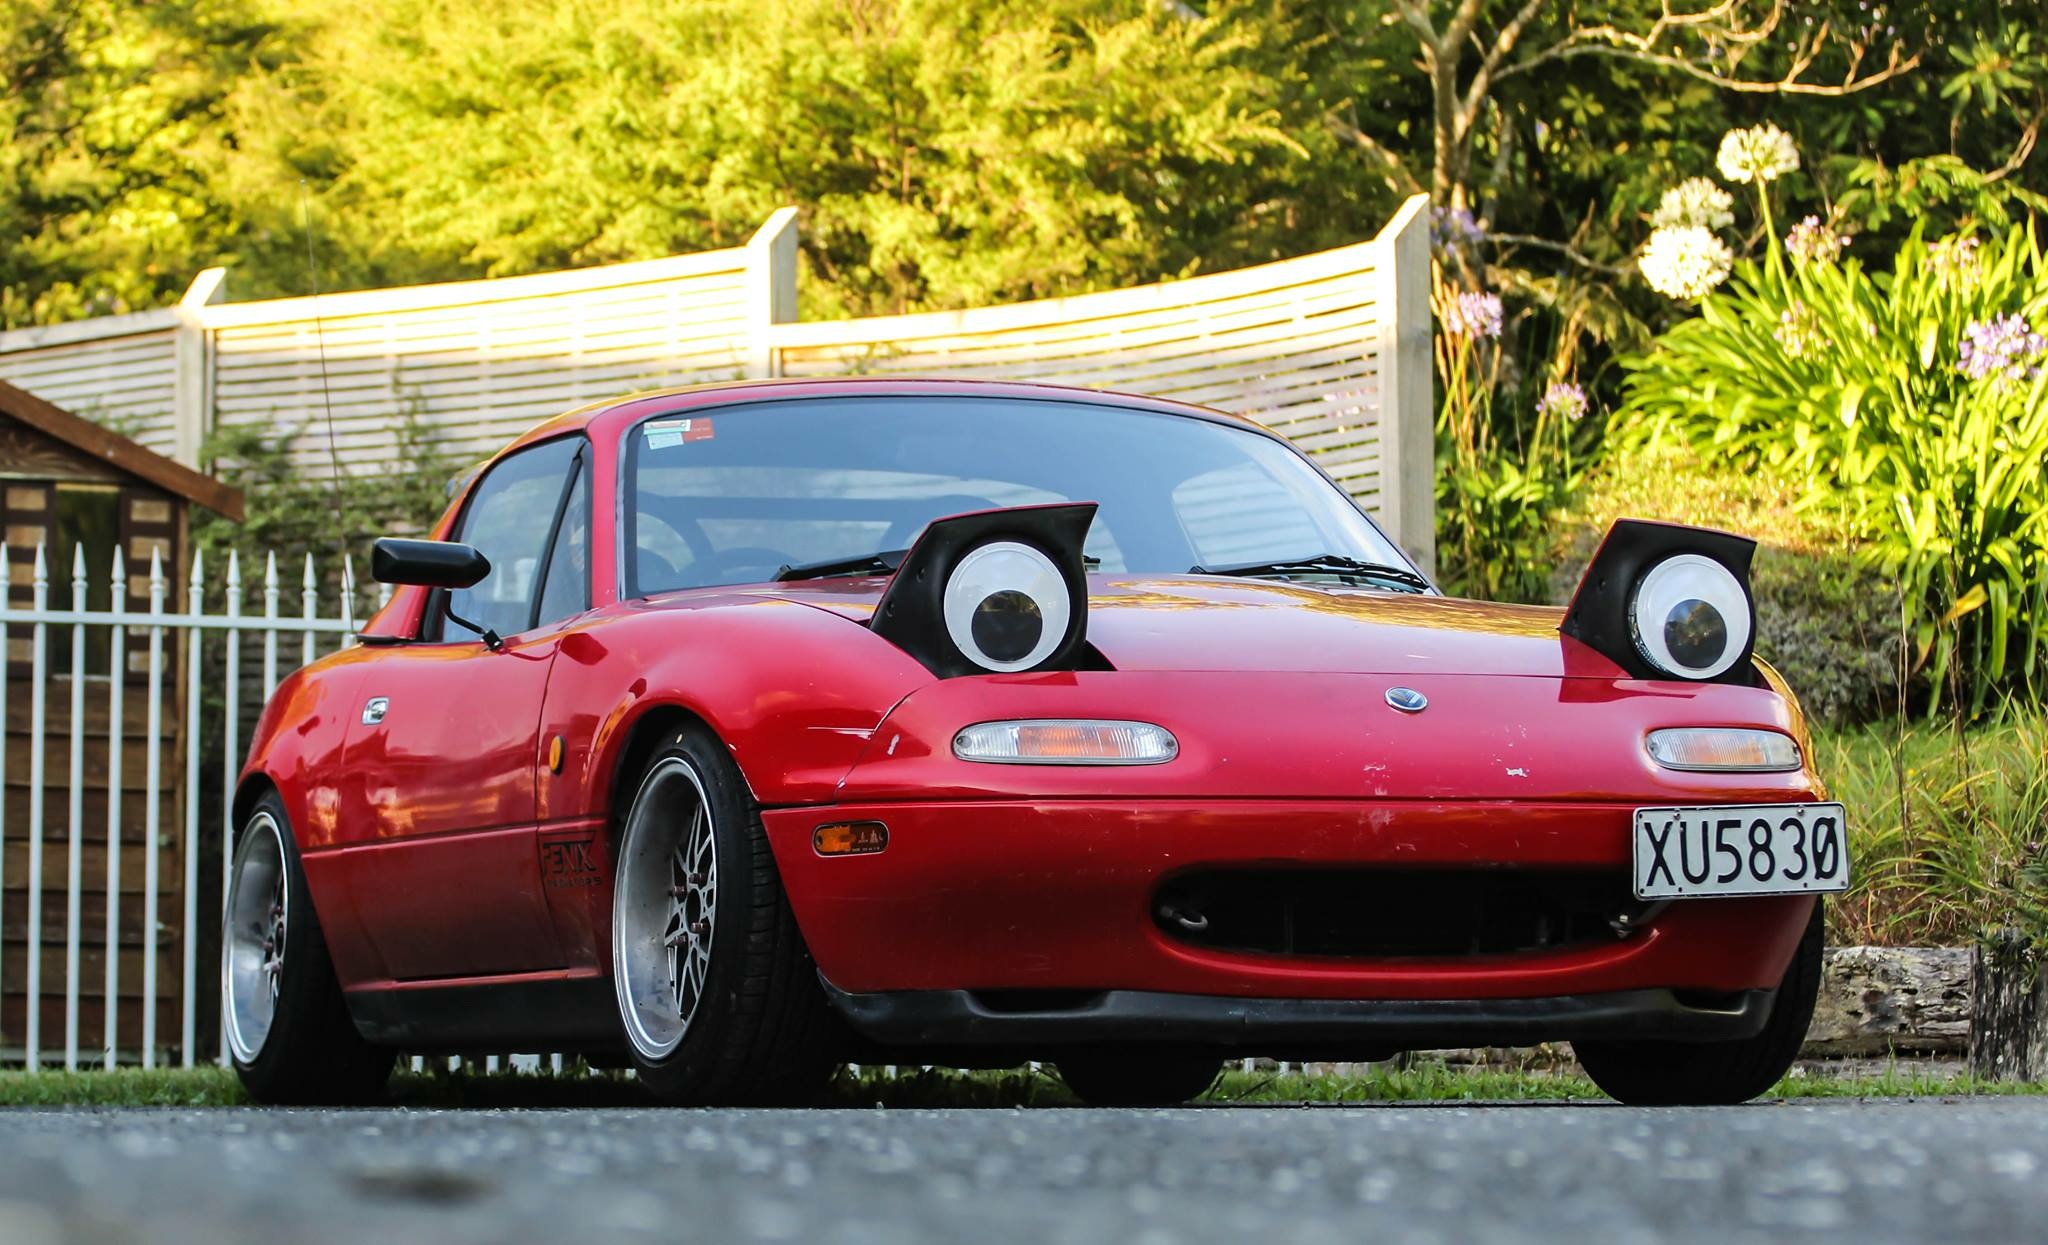 The Miata smile is always so happy especially with tacked on googly eyes. 